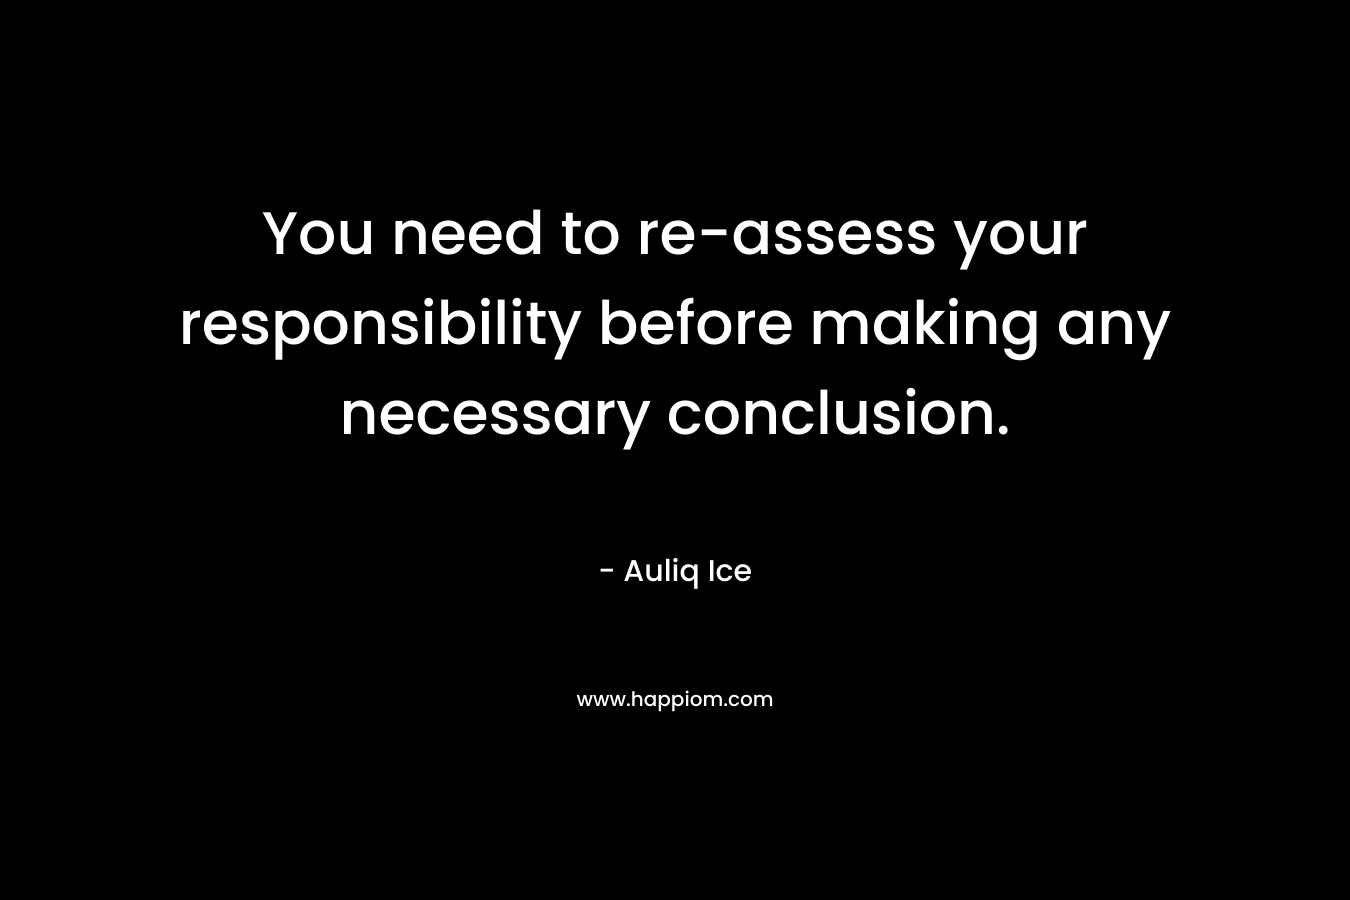 You need to re-assess your responsibility before making any necessary conclusion.